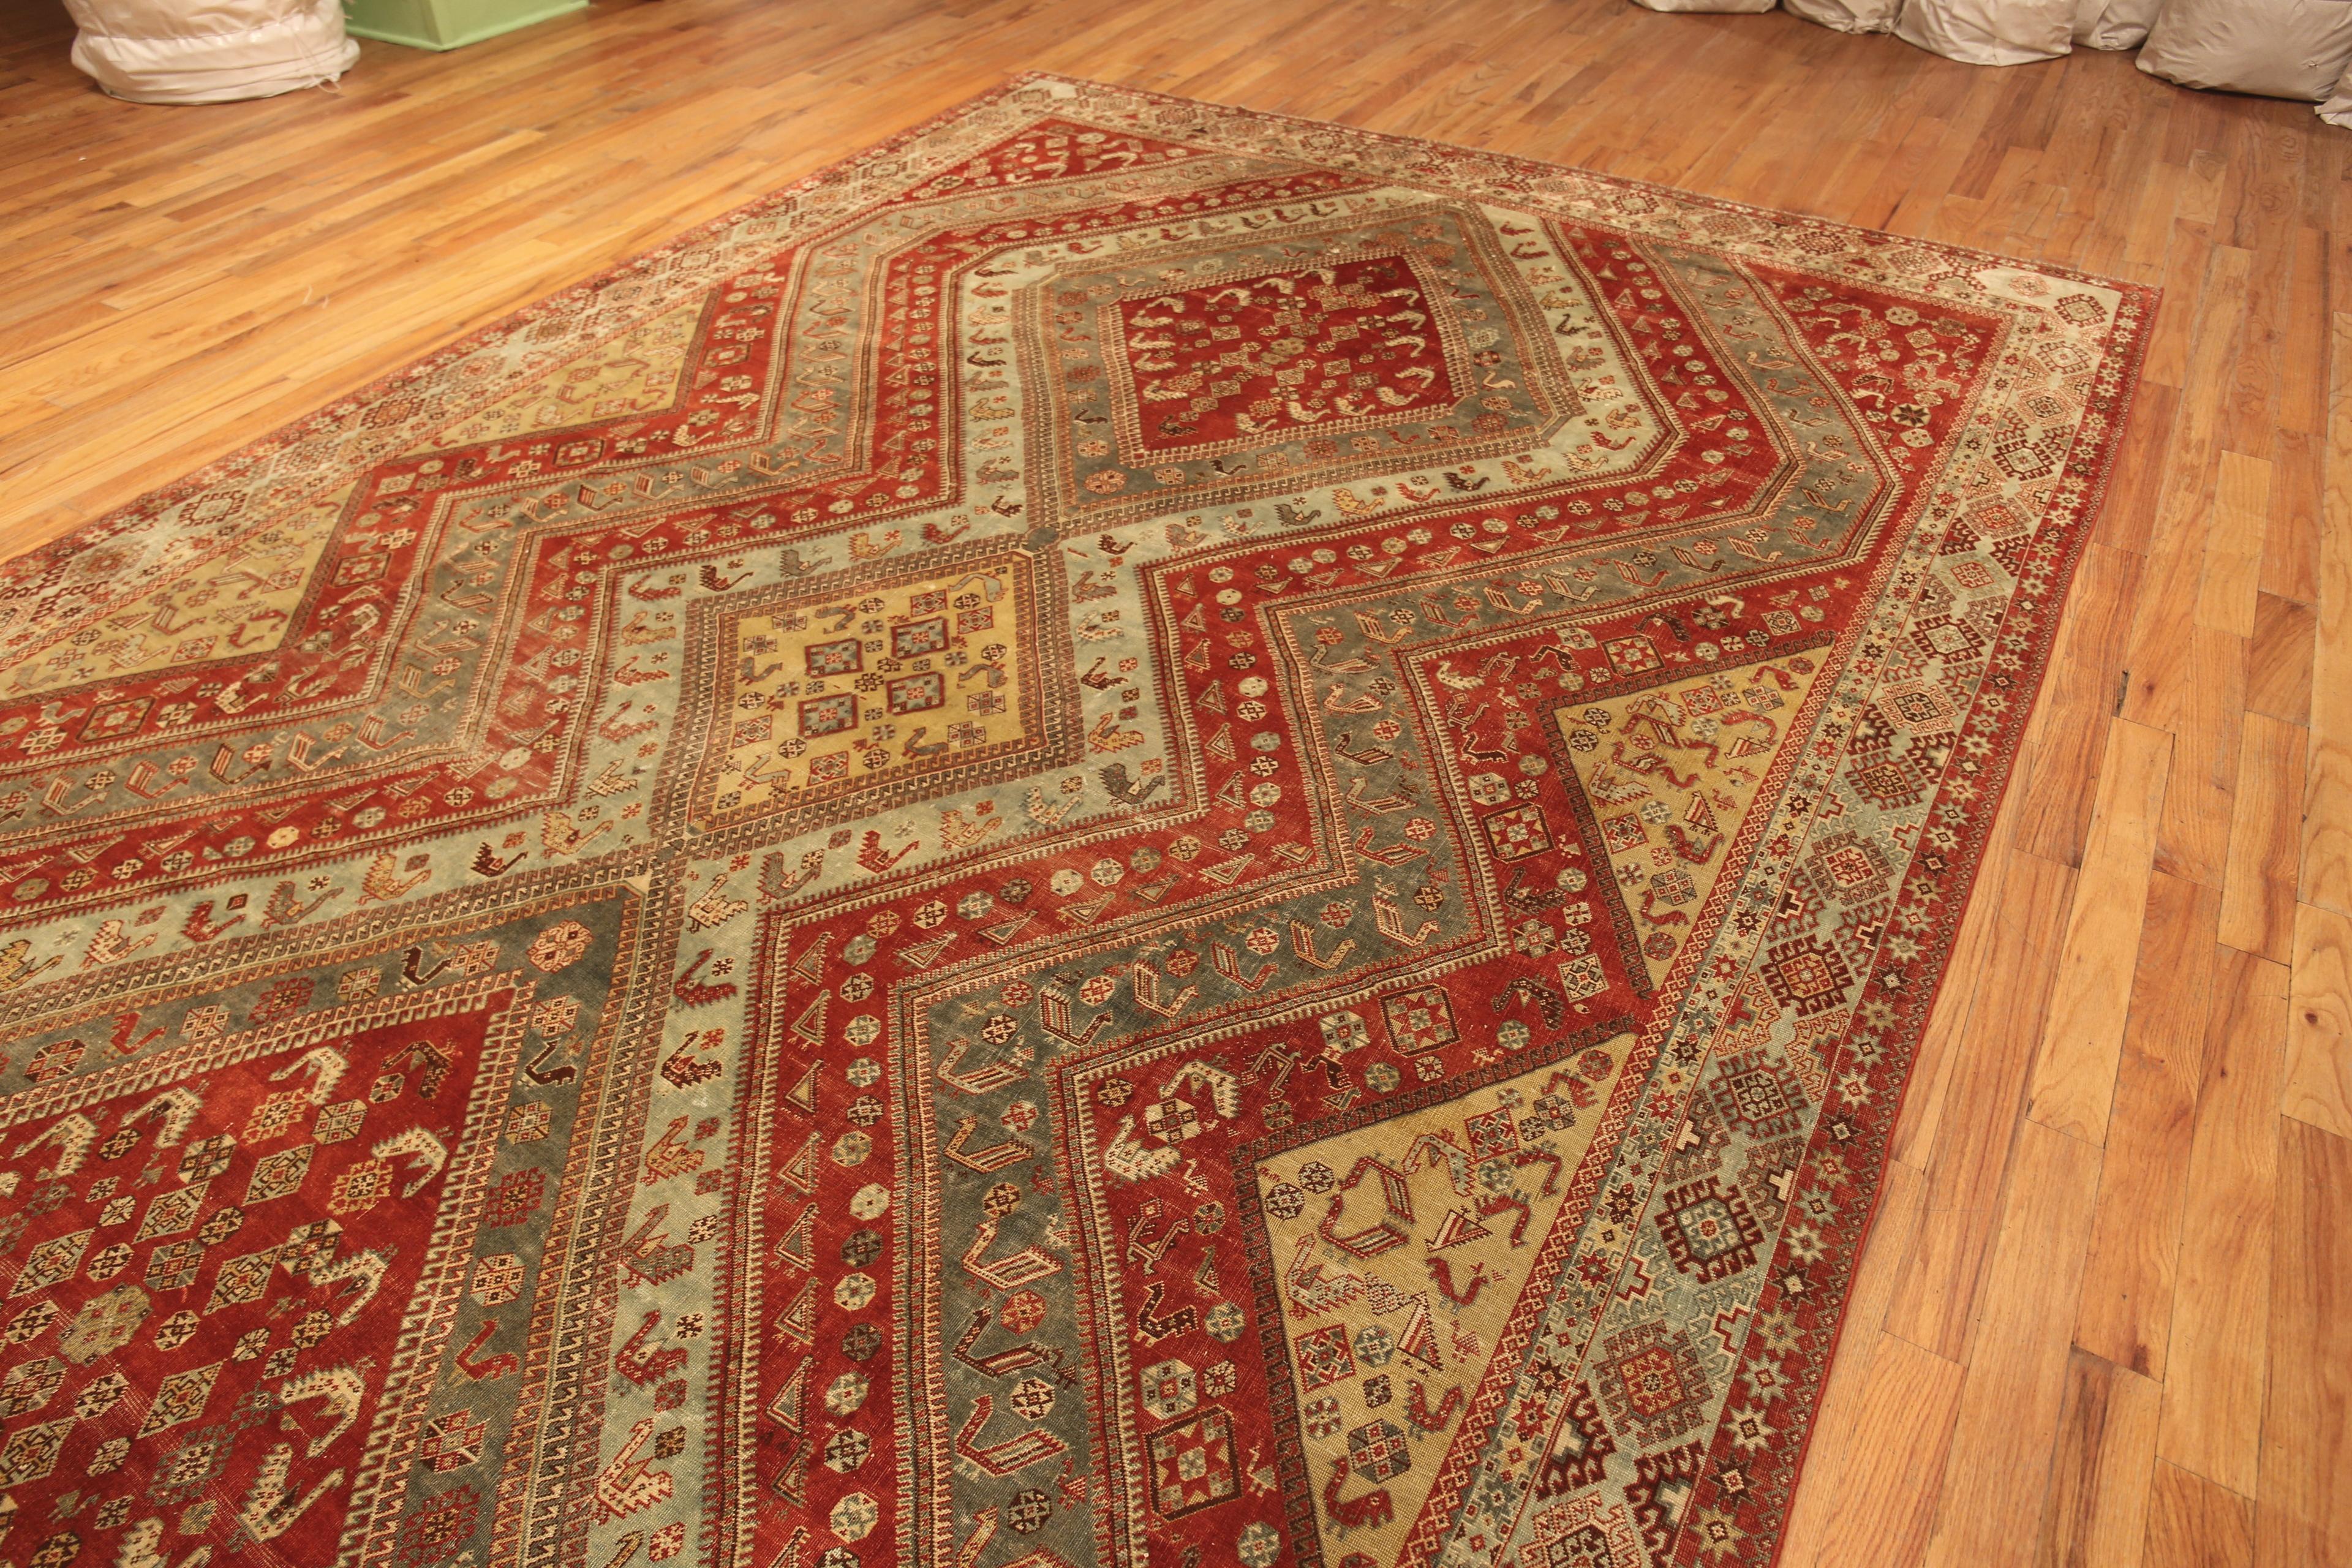 Large Antique Persian Qashqai Rug, Country of origin: Persia, Circa date: 1900. Size: 9 ft 7 in x 16 ft 2 in (2.92 m x 4.93 m)